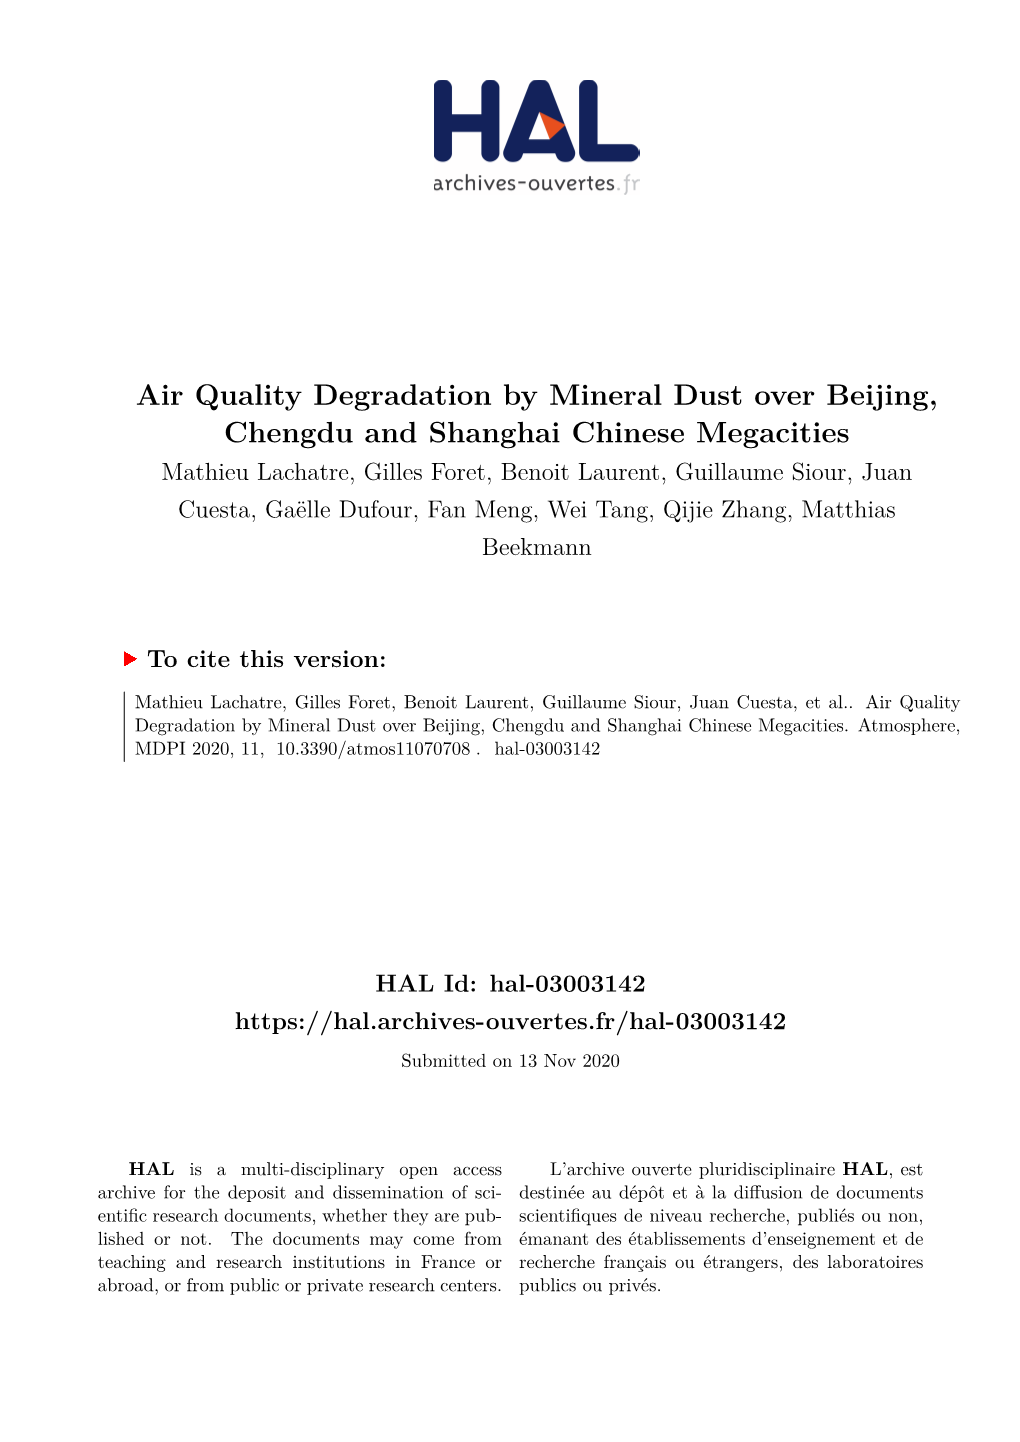 Air Quality Degradation by Mineral Dust Over Beijing, Chengdu And